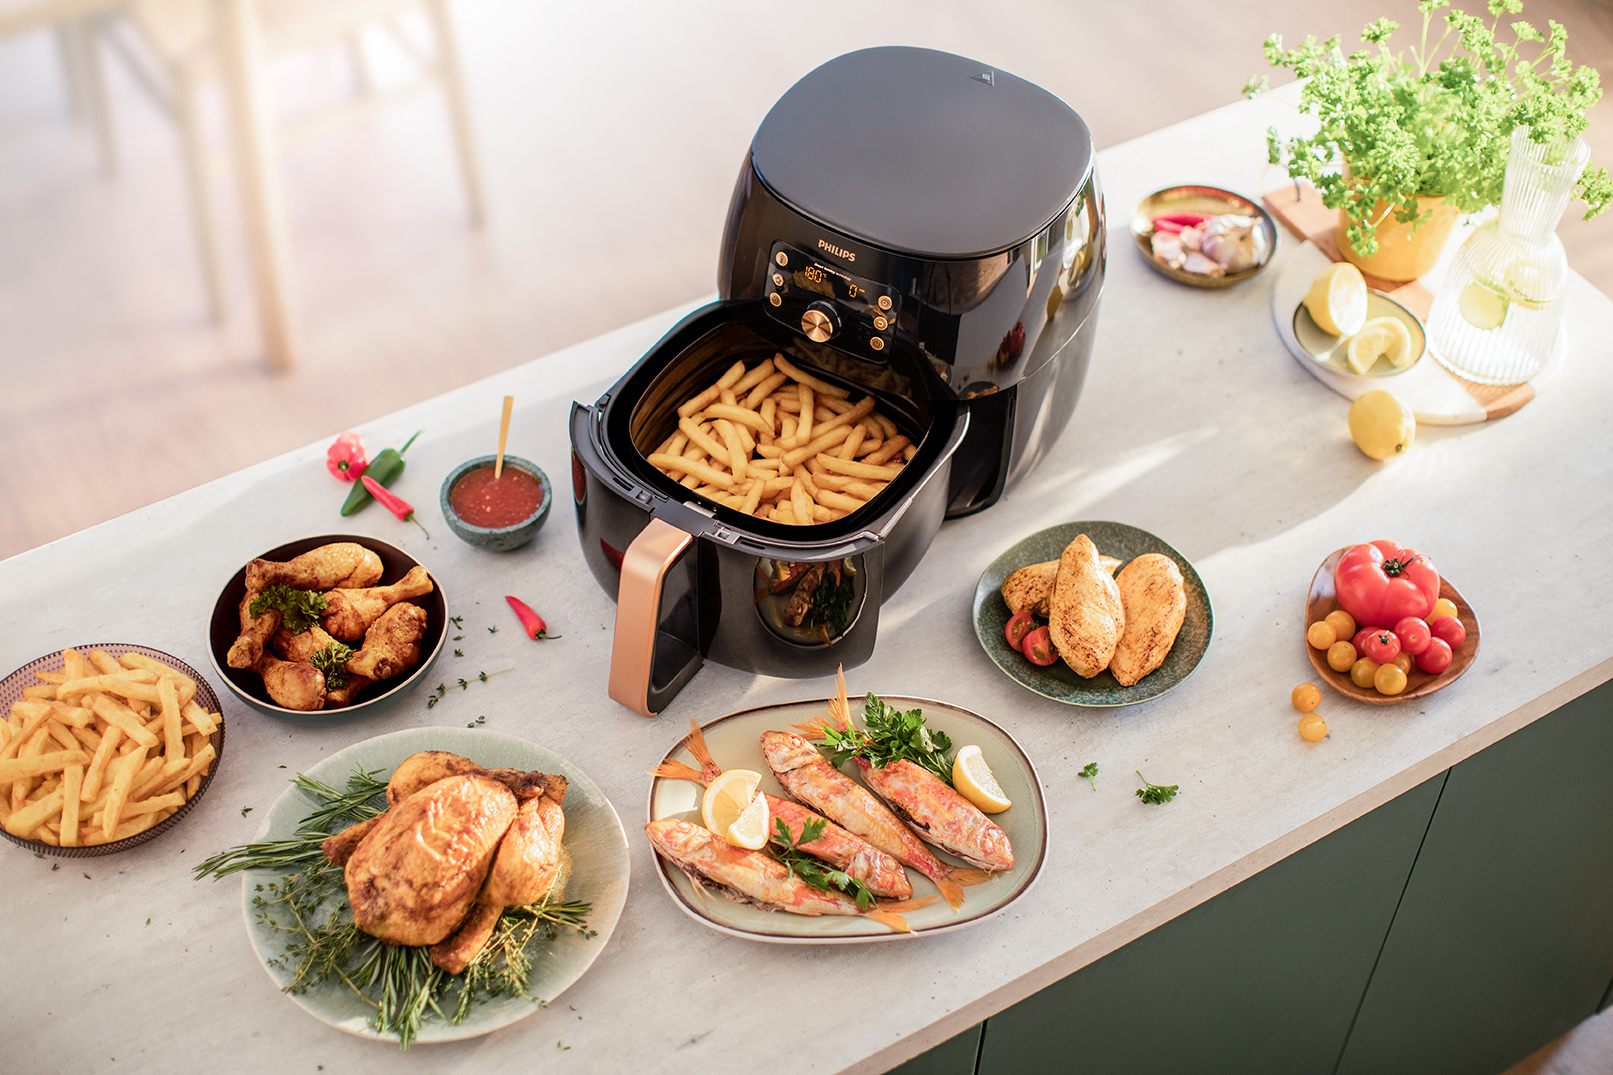 The Philips Airfryer XXL with Smart Sensing technology automatically adjusts time and temperature during the cooking process to ensure that every dish turns out perfectly cooked.